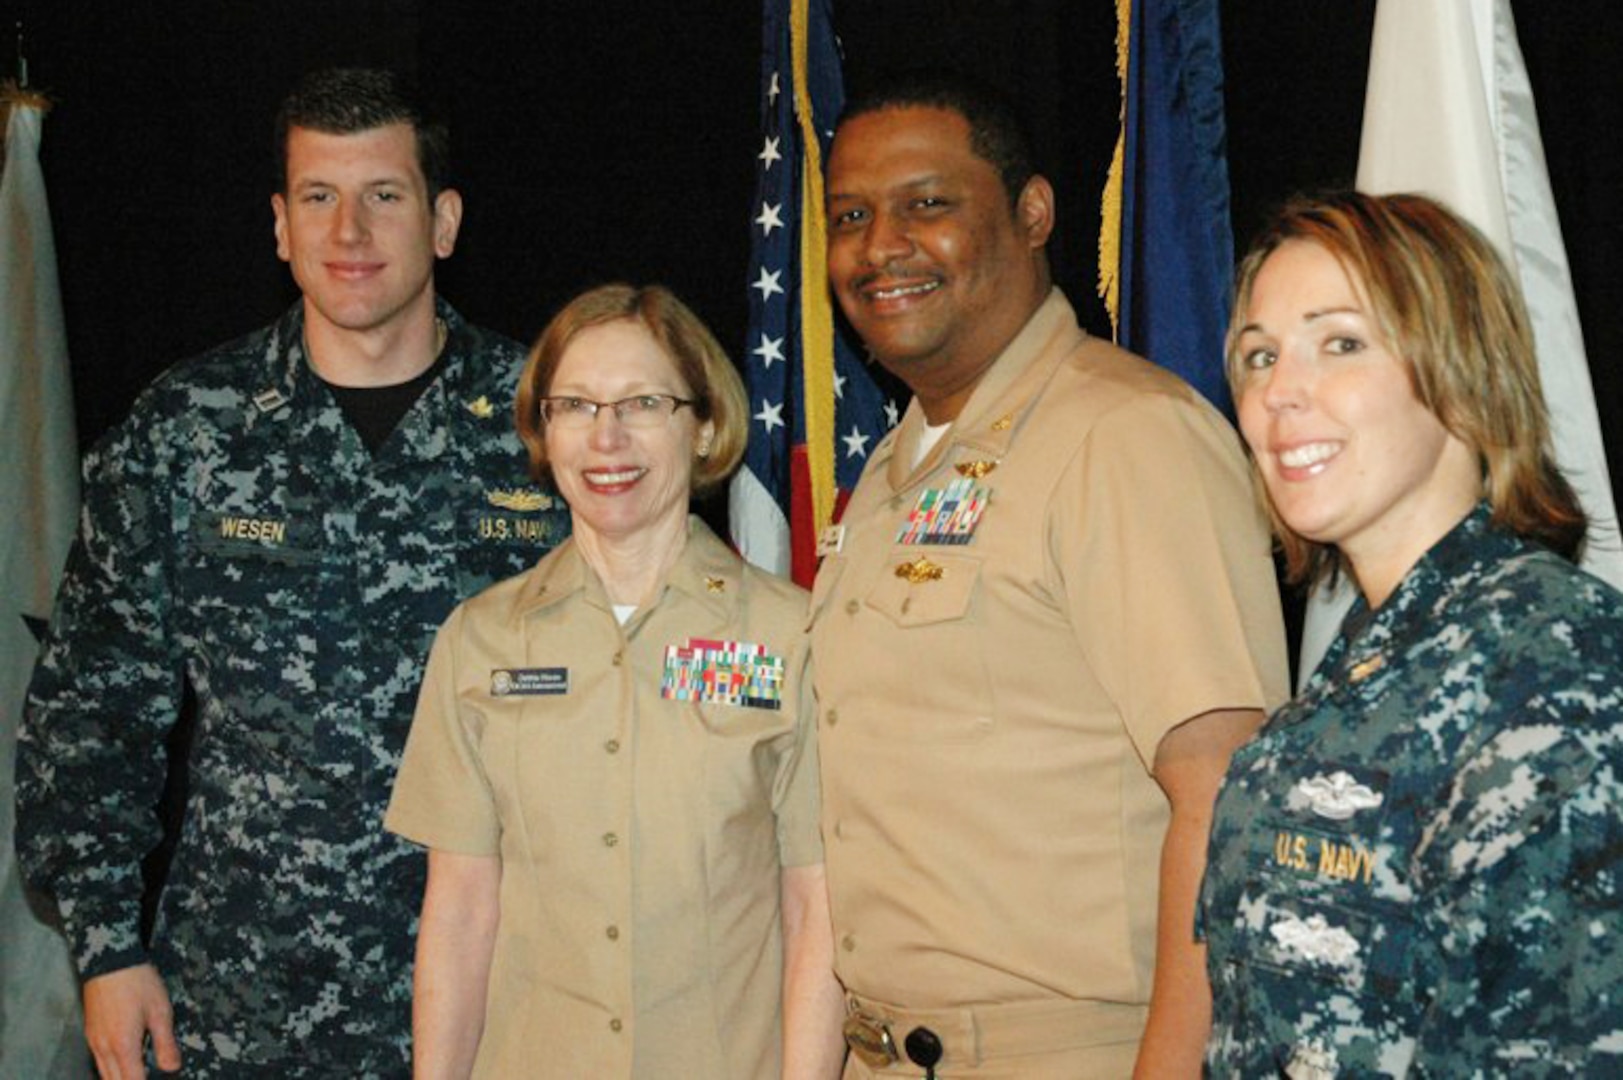 Navy Rear Adm. Deborah Haven (second from left), DCMA
International commander, joins members of DCMA’s Boeing St. Louis staff at the recent Professional Development Day program for Navy reserve and active duty supply corps officers at Scott Air Force Base, Ill. (Pictured from left) Navy Lt. Lance Wesen, contracts manager; Haven; Navy Lt. Cmdr. Greg Alexander, executive operations officer;
and Navy Lt. Dina Glasper, price and cost analyst.